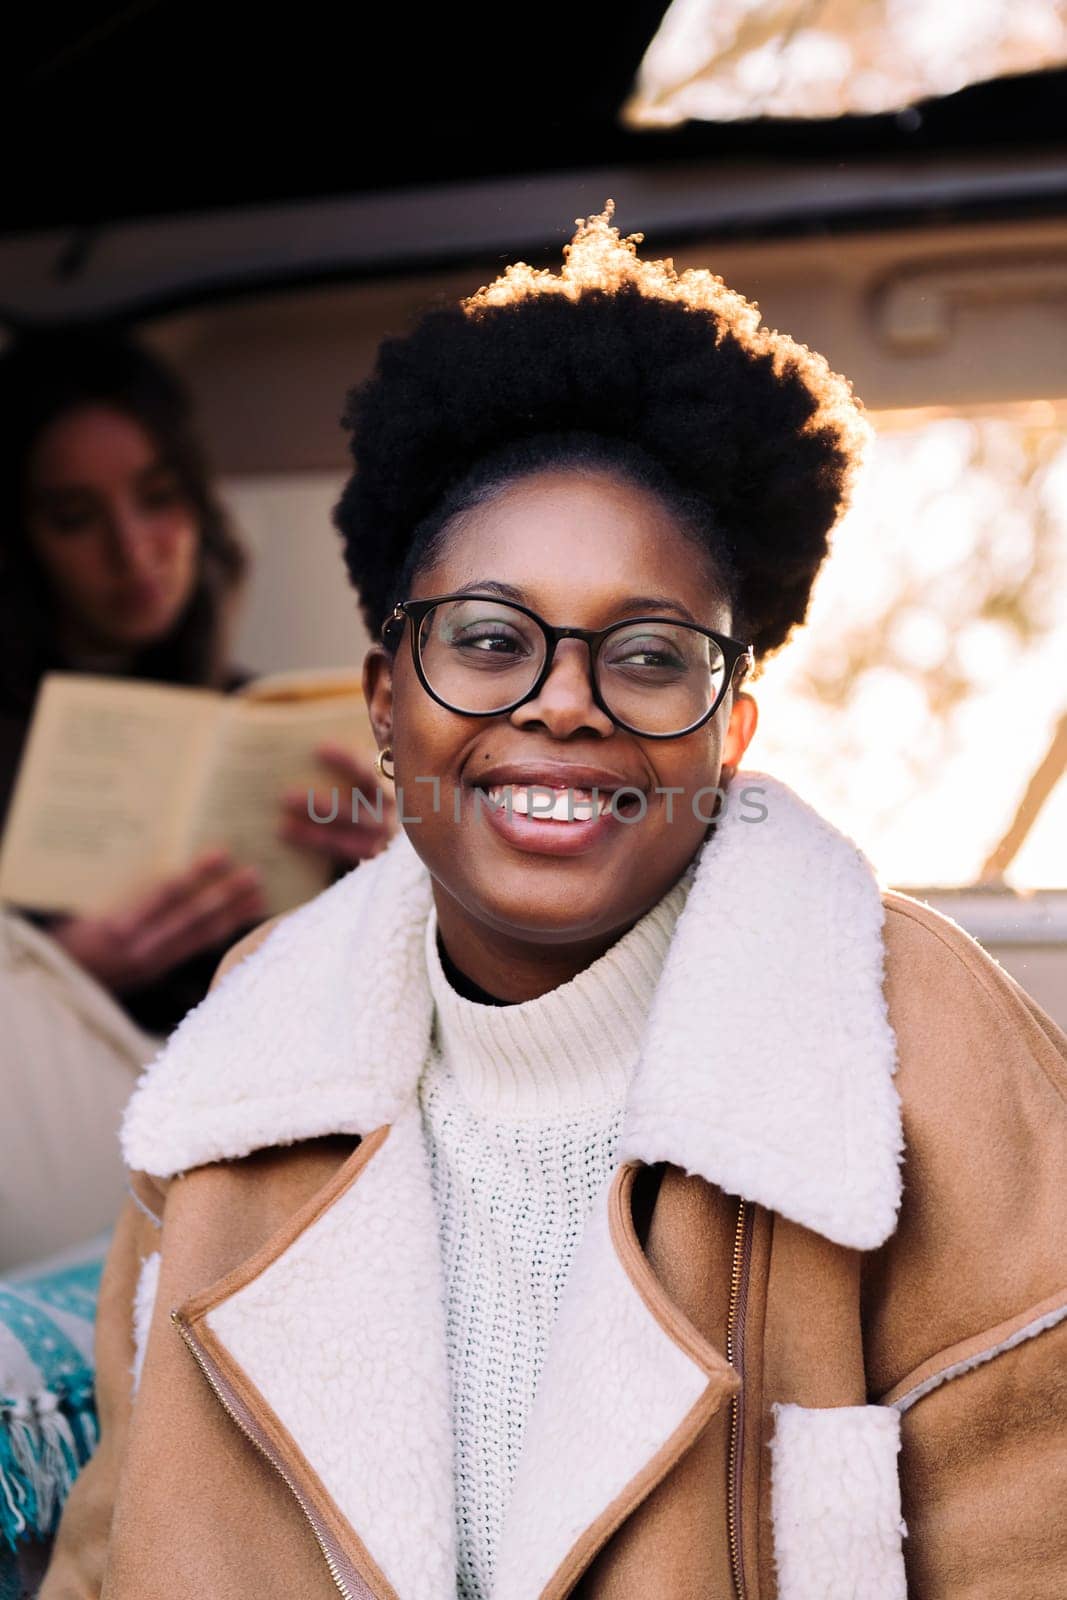 vertical portrait of a young black woman smiling at sunset sitting in a camper van with a friend reading in the background, concept of travel adventure and female friendship